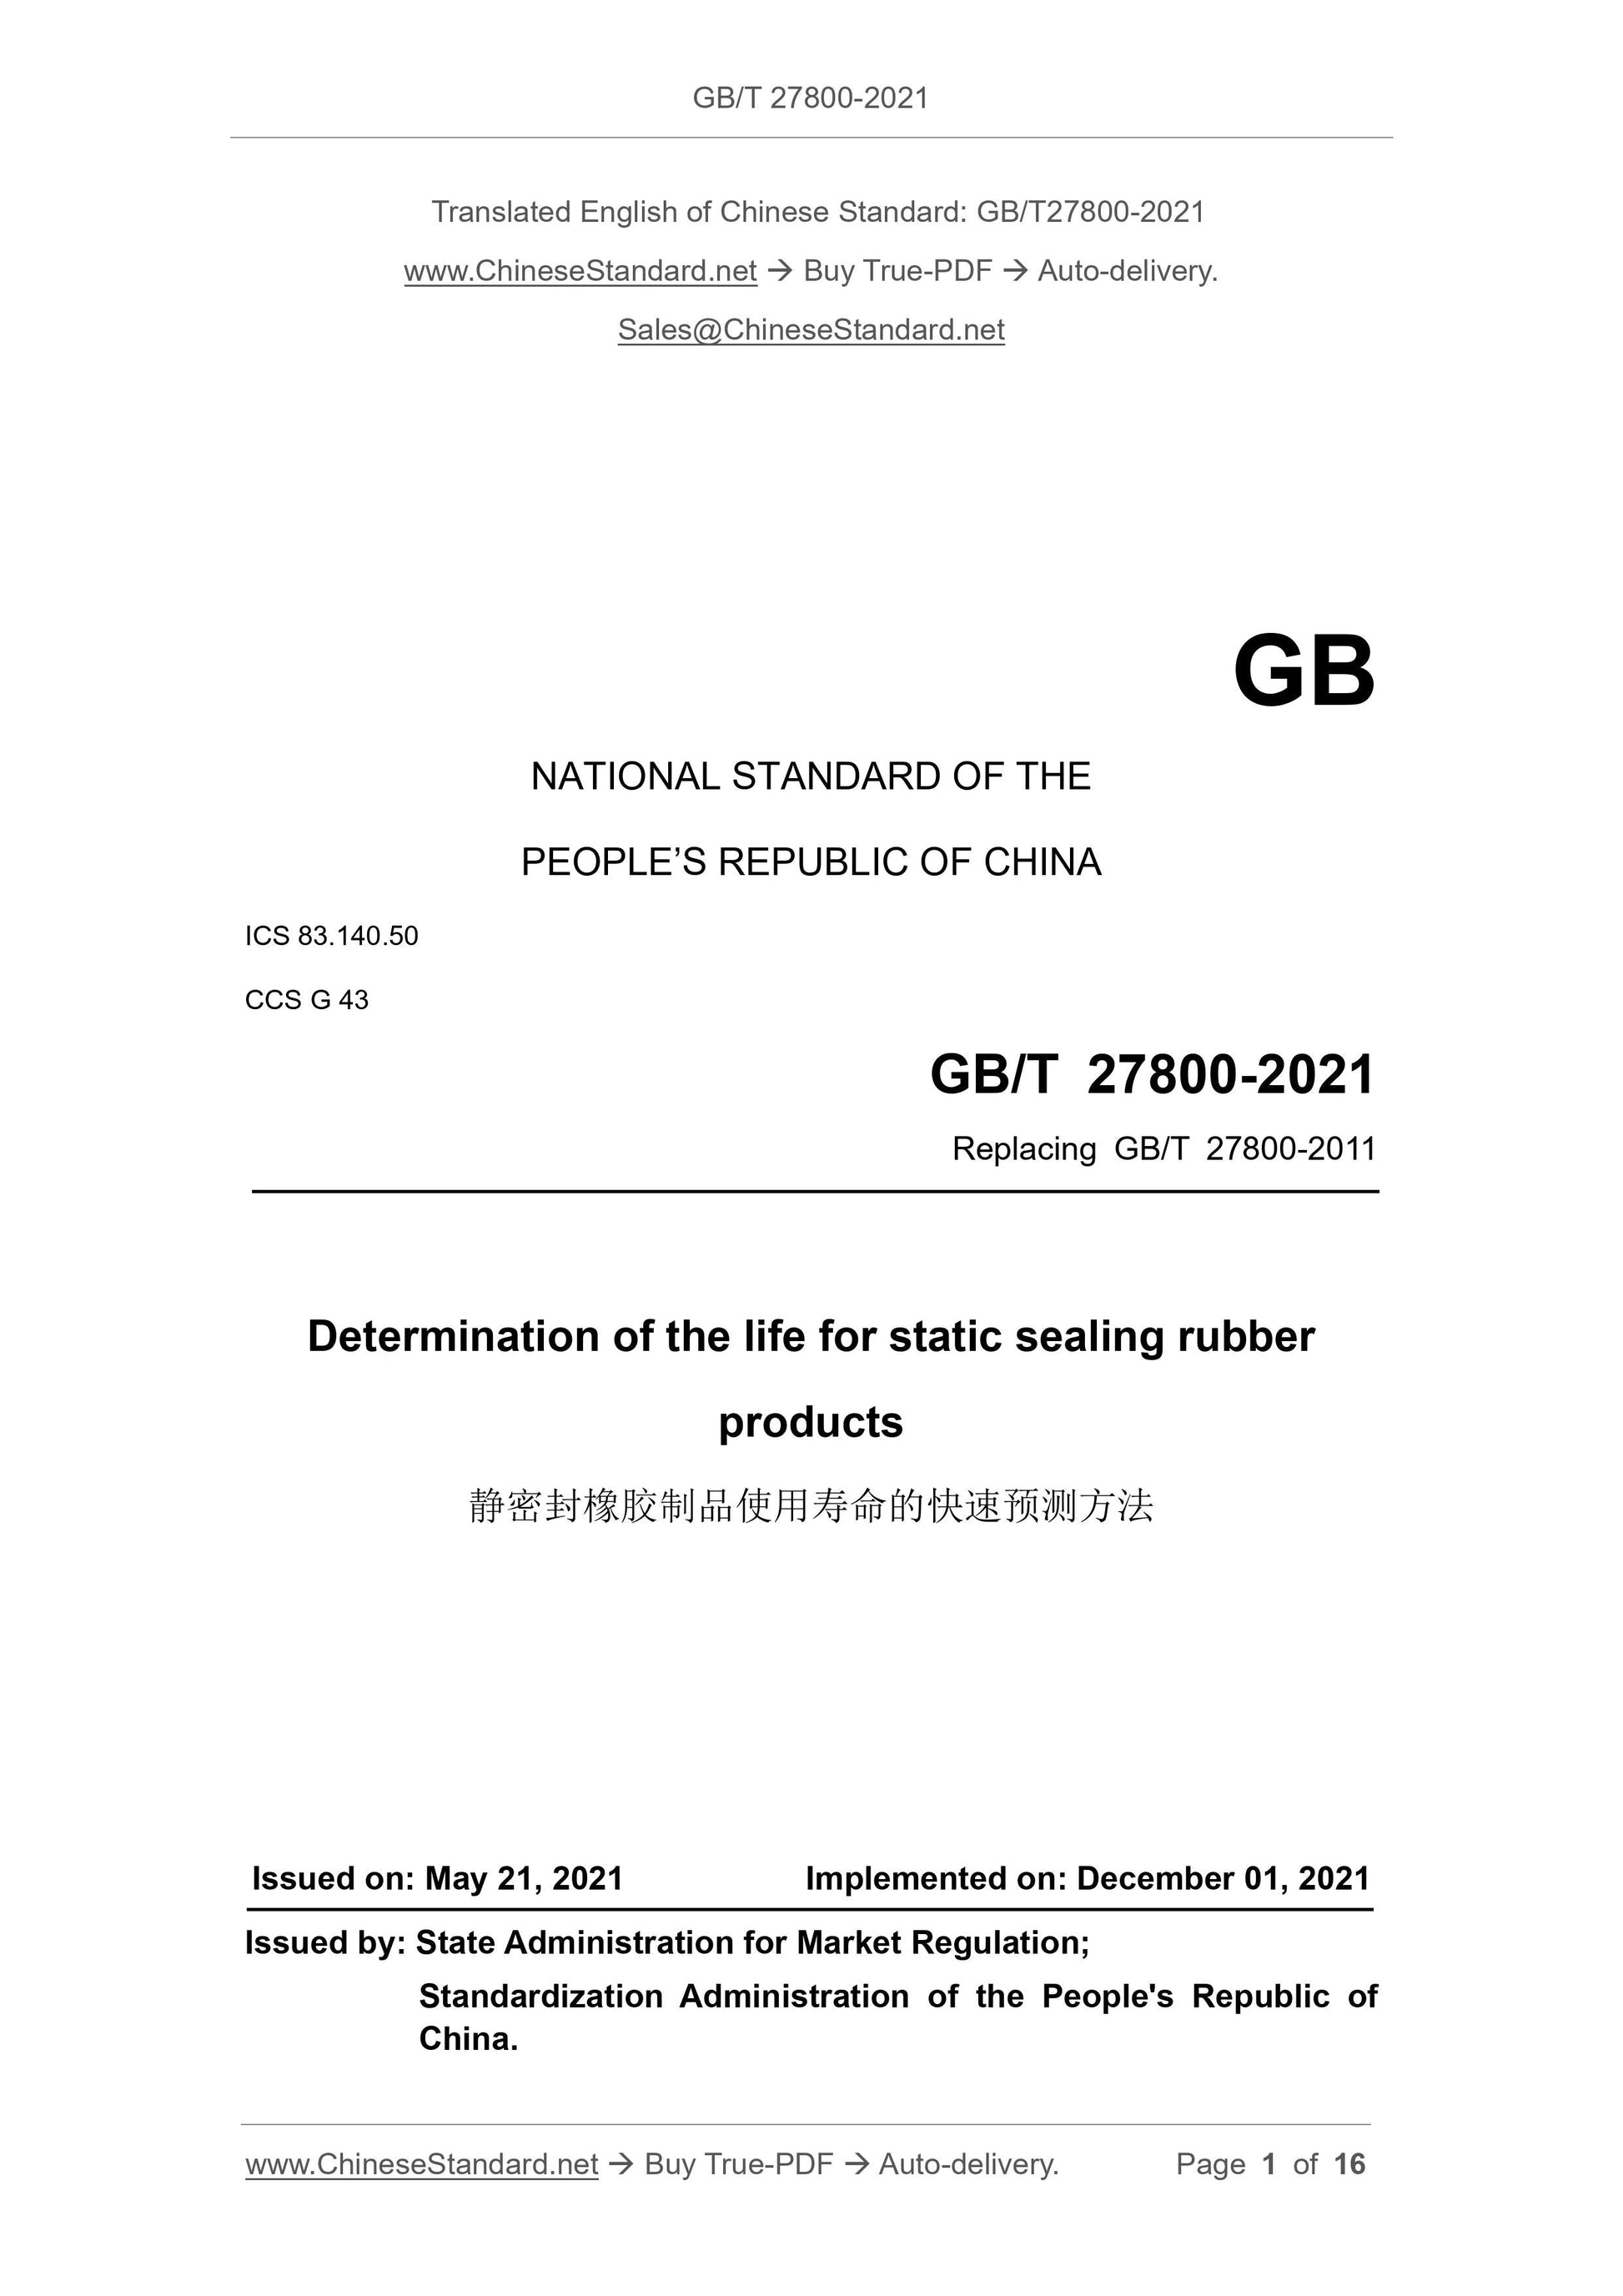 GB/T 27800-2021 Page 1